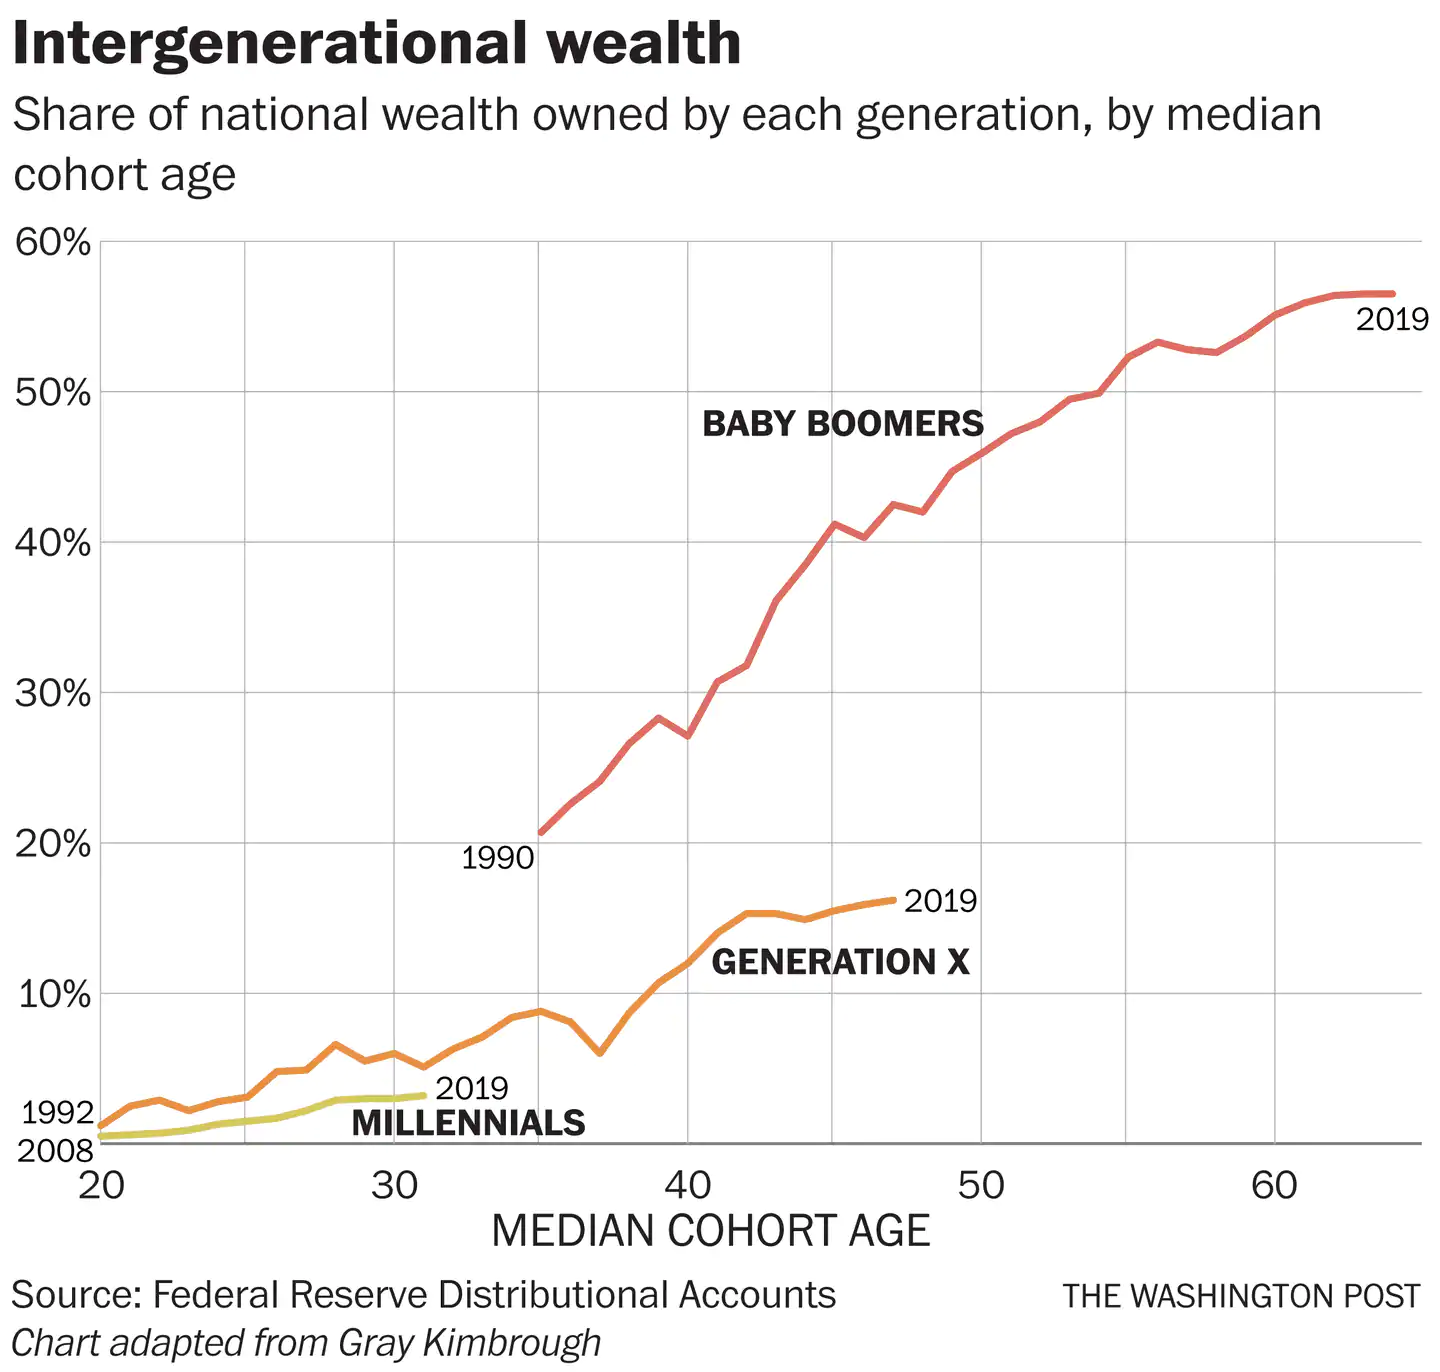 Share of national wealth owned by each generation, by median cohort age. Baby boomers — those born between 1946 and 1964 — collectively owned 21 percent of the nation’s wealth by the time their generation hit a median age of 35 in 1990. Generation X (born from 1965 to 1980) came of age during the era of wage stagnation and growing inequality ushered in by the 1970s and ’80s. When the typical Gen Xer reached 35 in 2008, his or her share of the nation’s wealth was just 9 percent, less than half that of boomers at a comparable point in life. Millennials haven’t hit the 35 mark yet — that won’t happen until about 2023 — but their financial situation is relatively dire. They own just 3.2 percent of the nation’s wealth. To catch up to Gen Xers, they’d need to triple their wealth in just four years. To reach boomers, their net worth would need a sevenfold jump. Graphic: Gray Kimbrough / The Washington Post